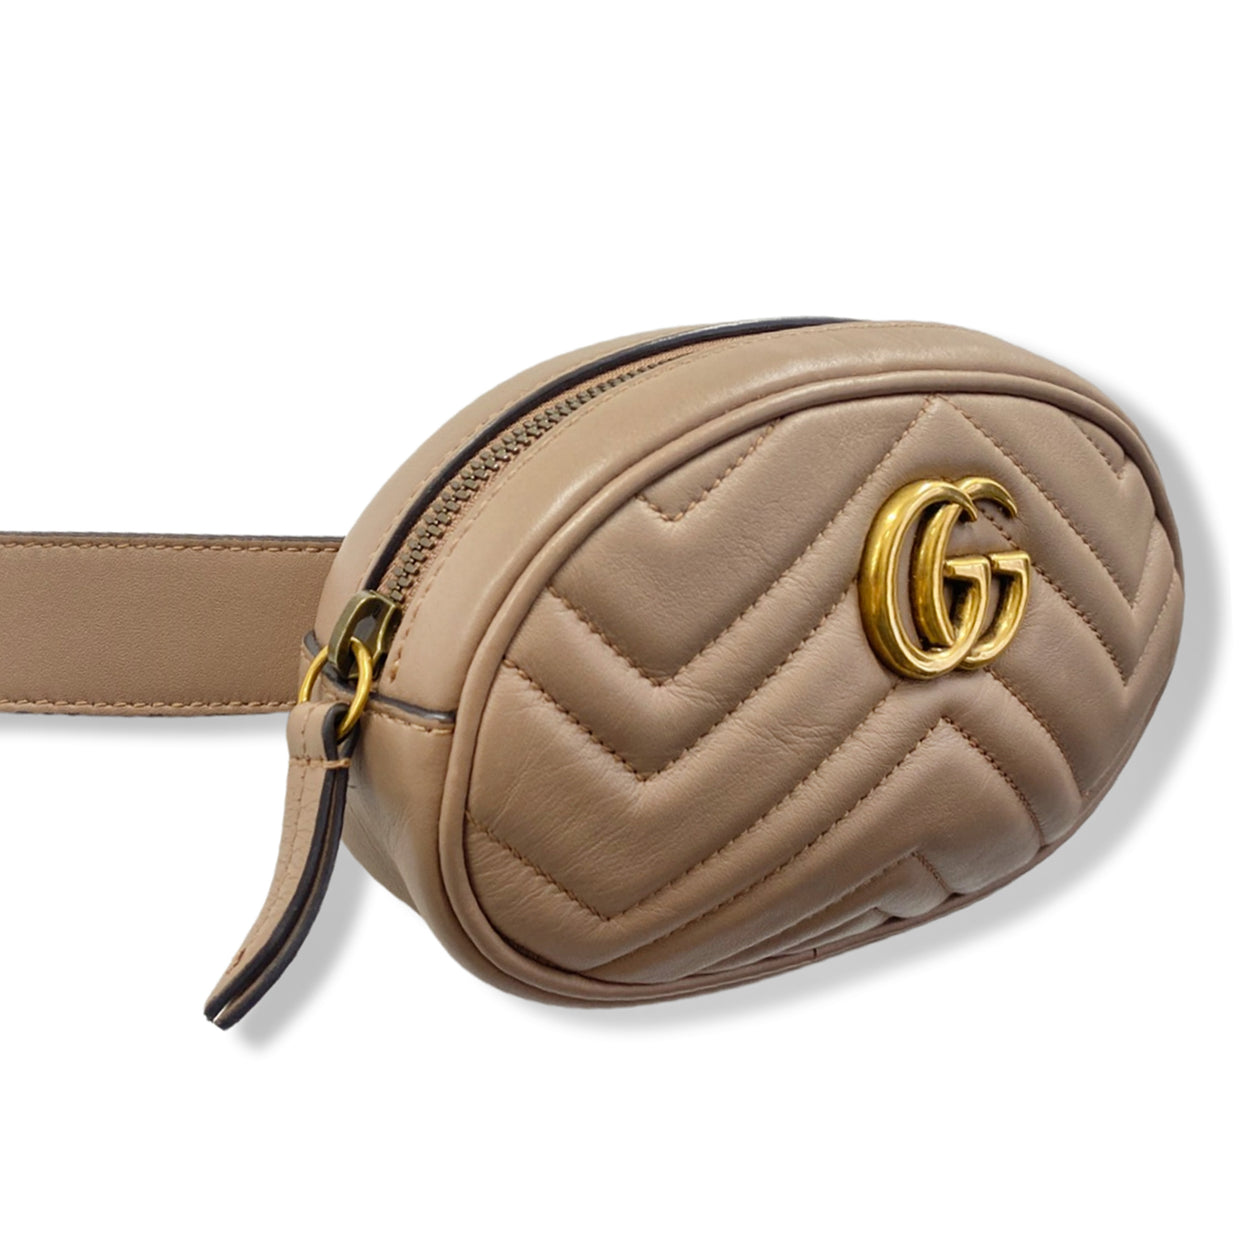 Gucci - Authenticated Marmont Purse - Leather Beige for Women, Very Good Condition